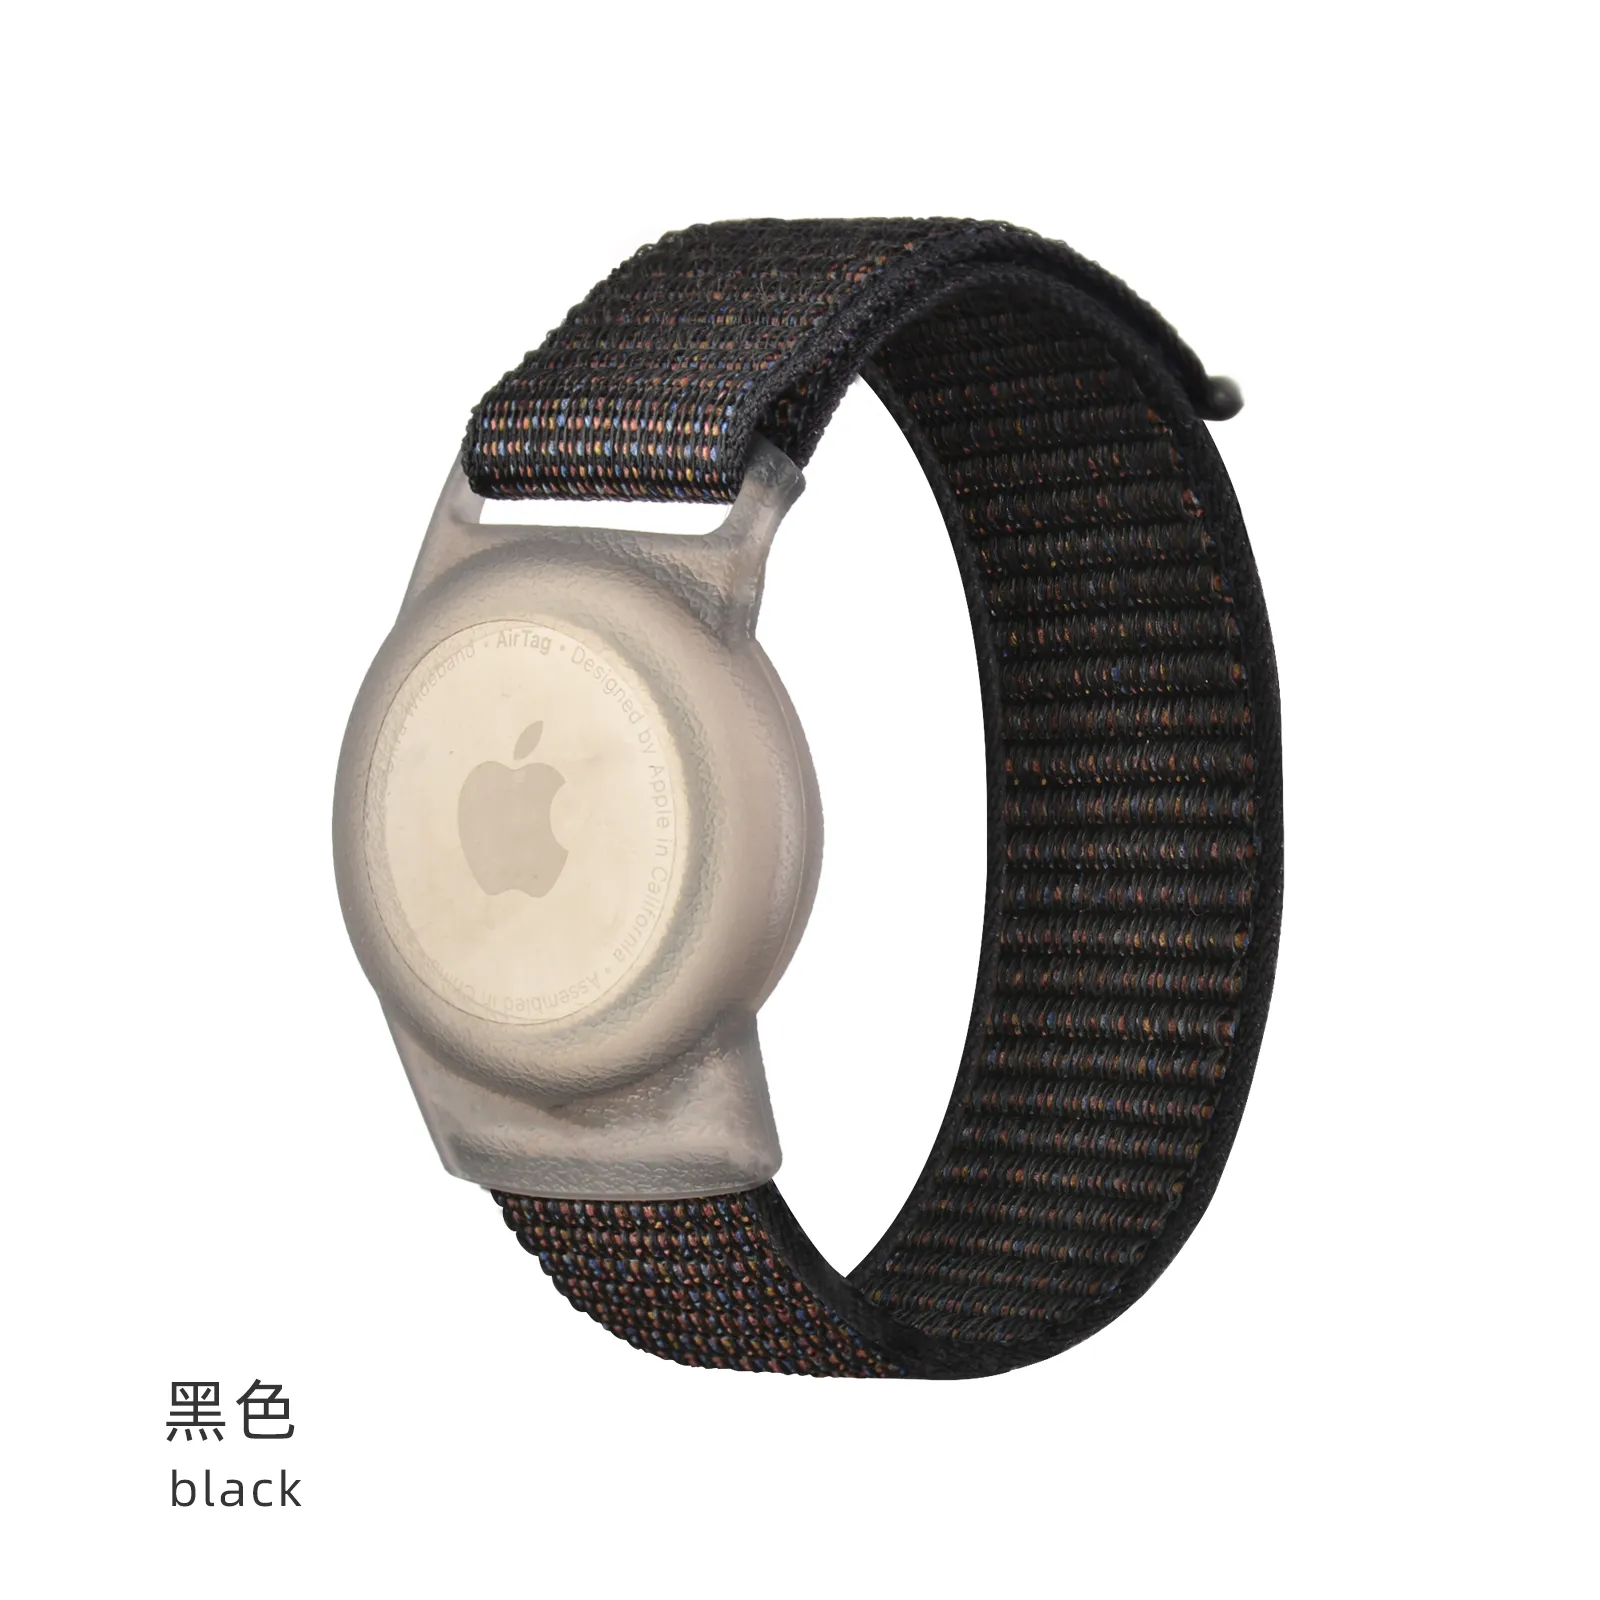 Nylon Anti-lost Wrist Band For Airtag Watch Band Old Man Kids Soft Silicone Cover For Apple Airtag Watch Band Trace Tracker Airt